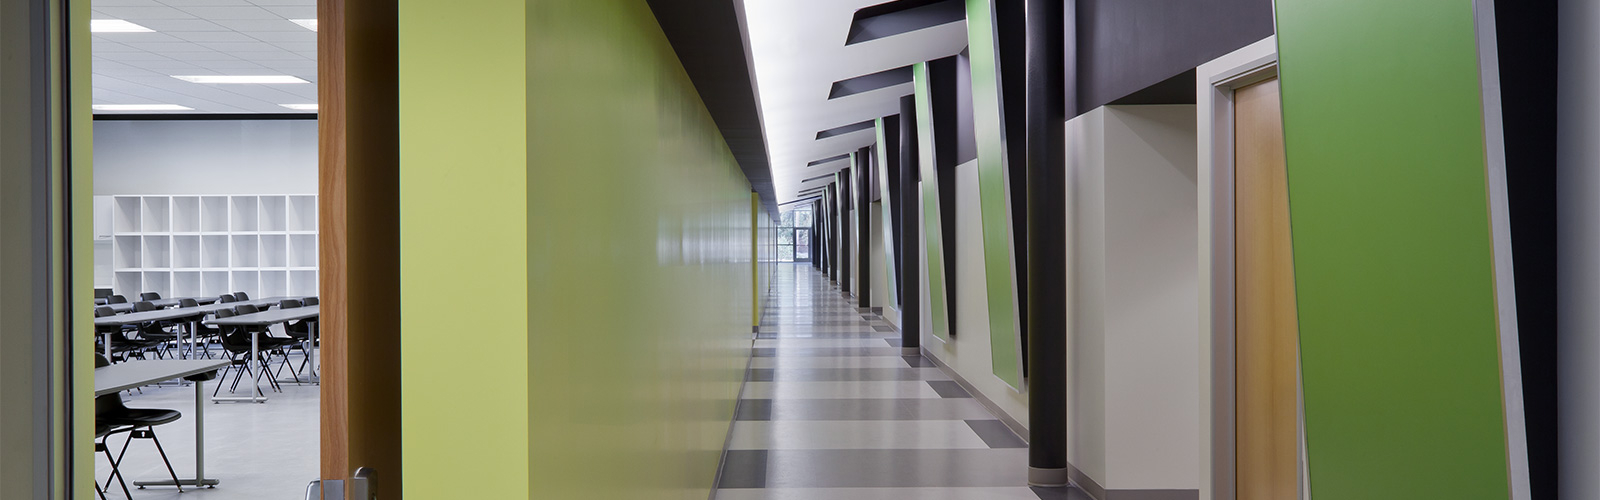 An image of a large empty classroom hallway with a green, gray and white color combination.